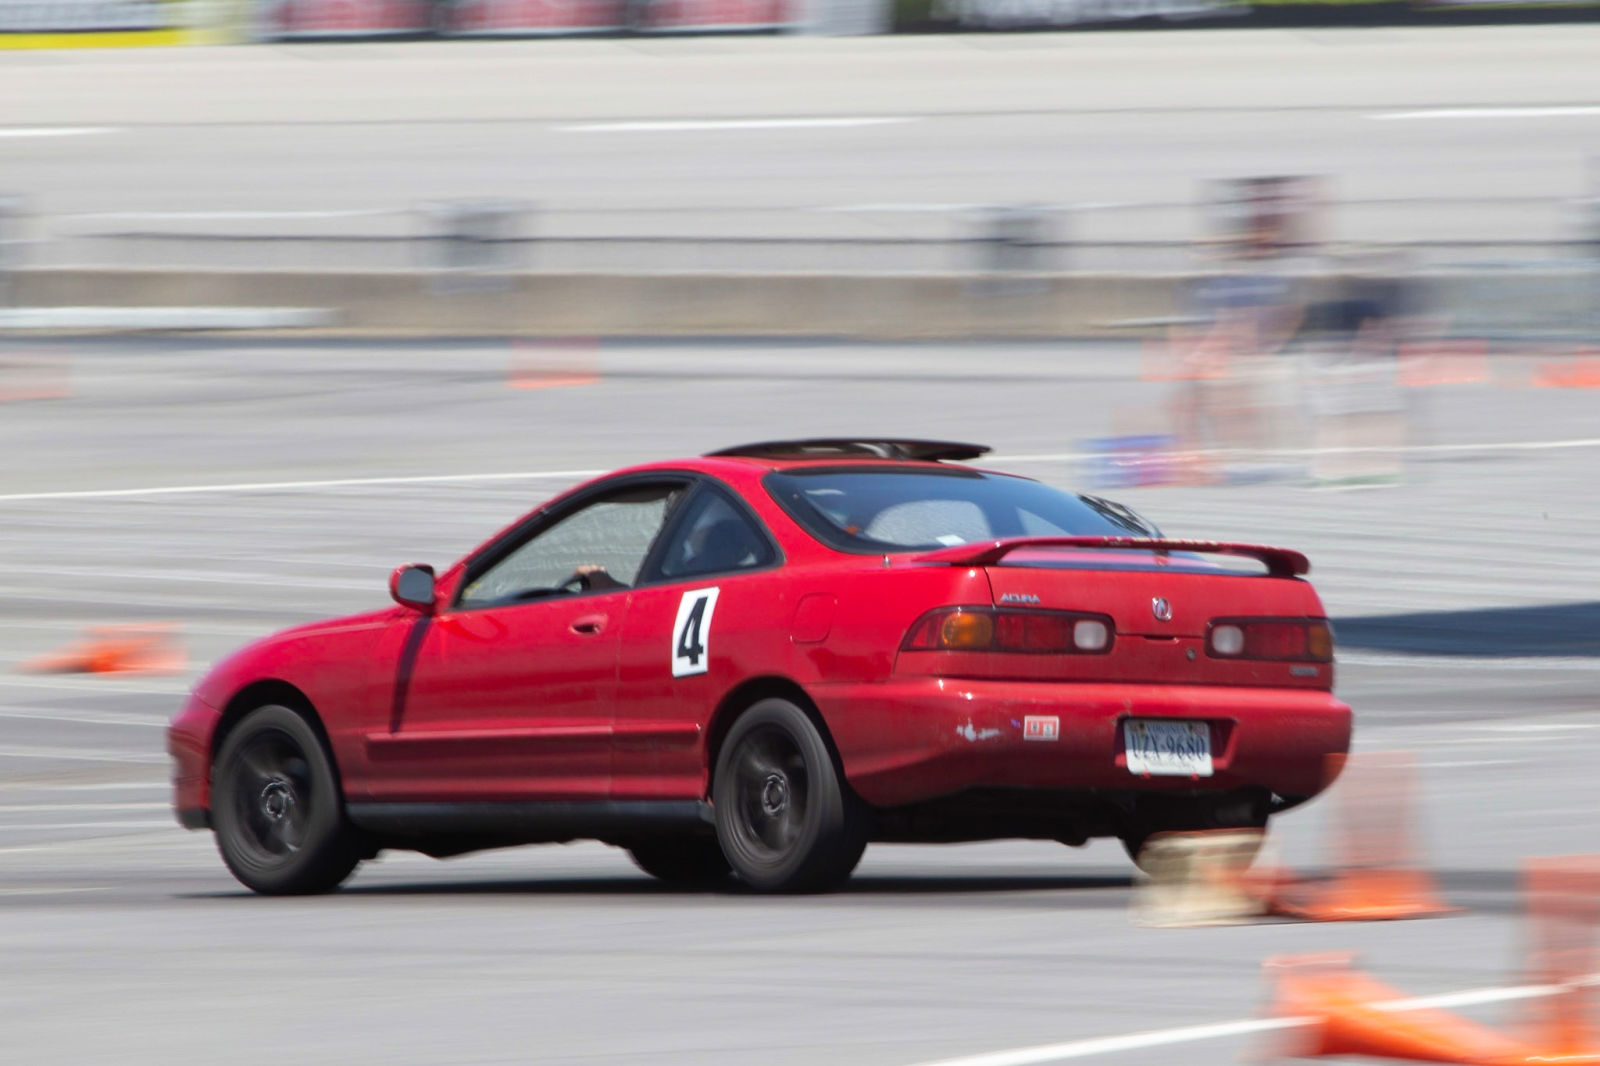 Illustration for article titled First Autocross with the S2000 at RIR